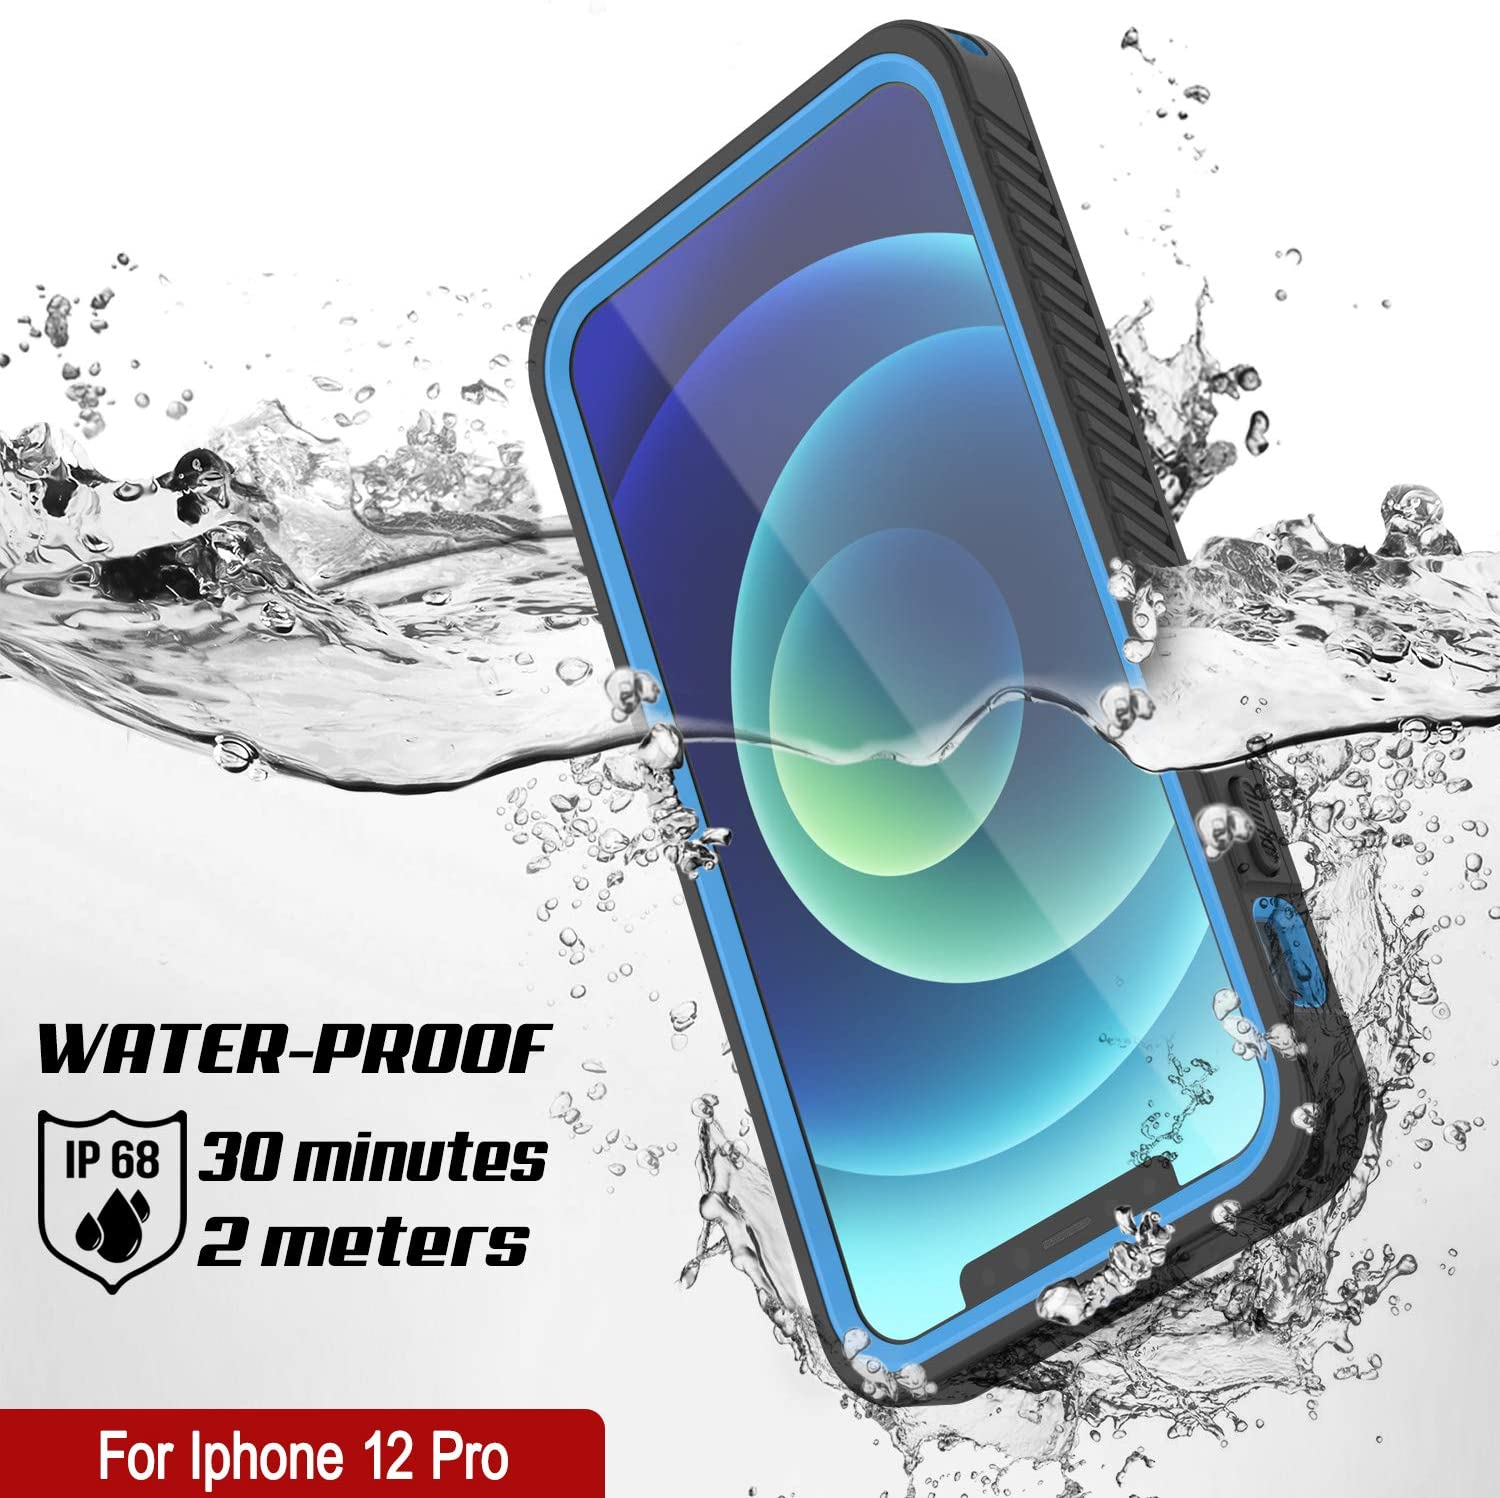 iPhone 12 Pro Waterproof Case, Punkcase [Extreme Series] Armor Cover W/ Built In Screen Protector [Light Blue]